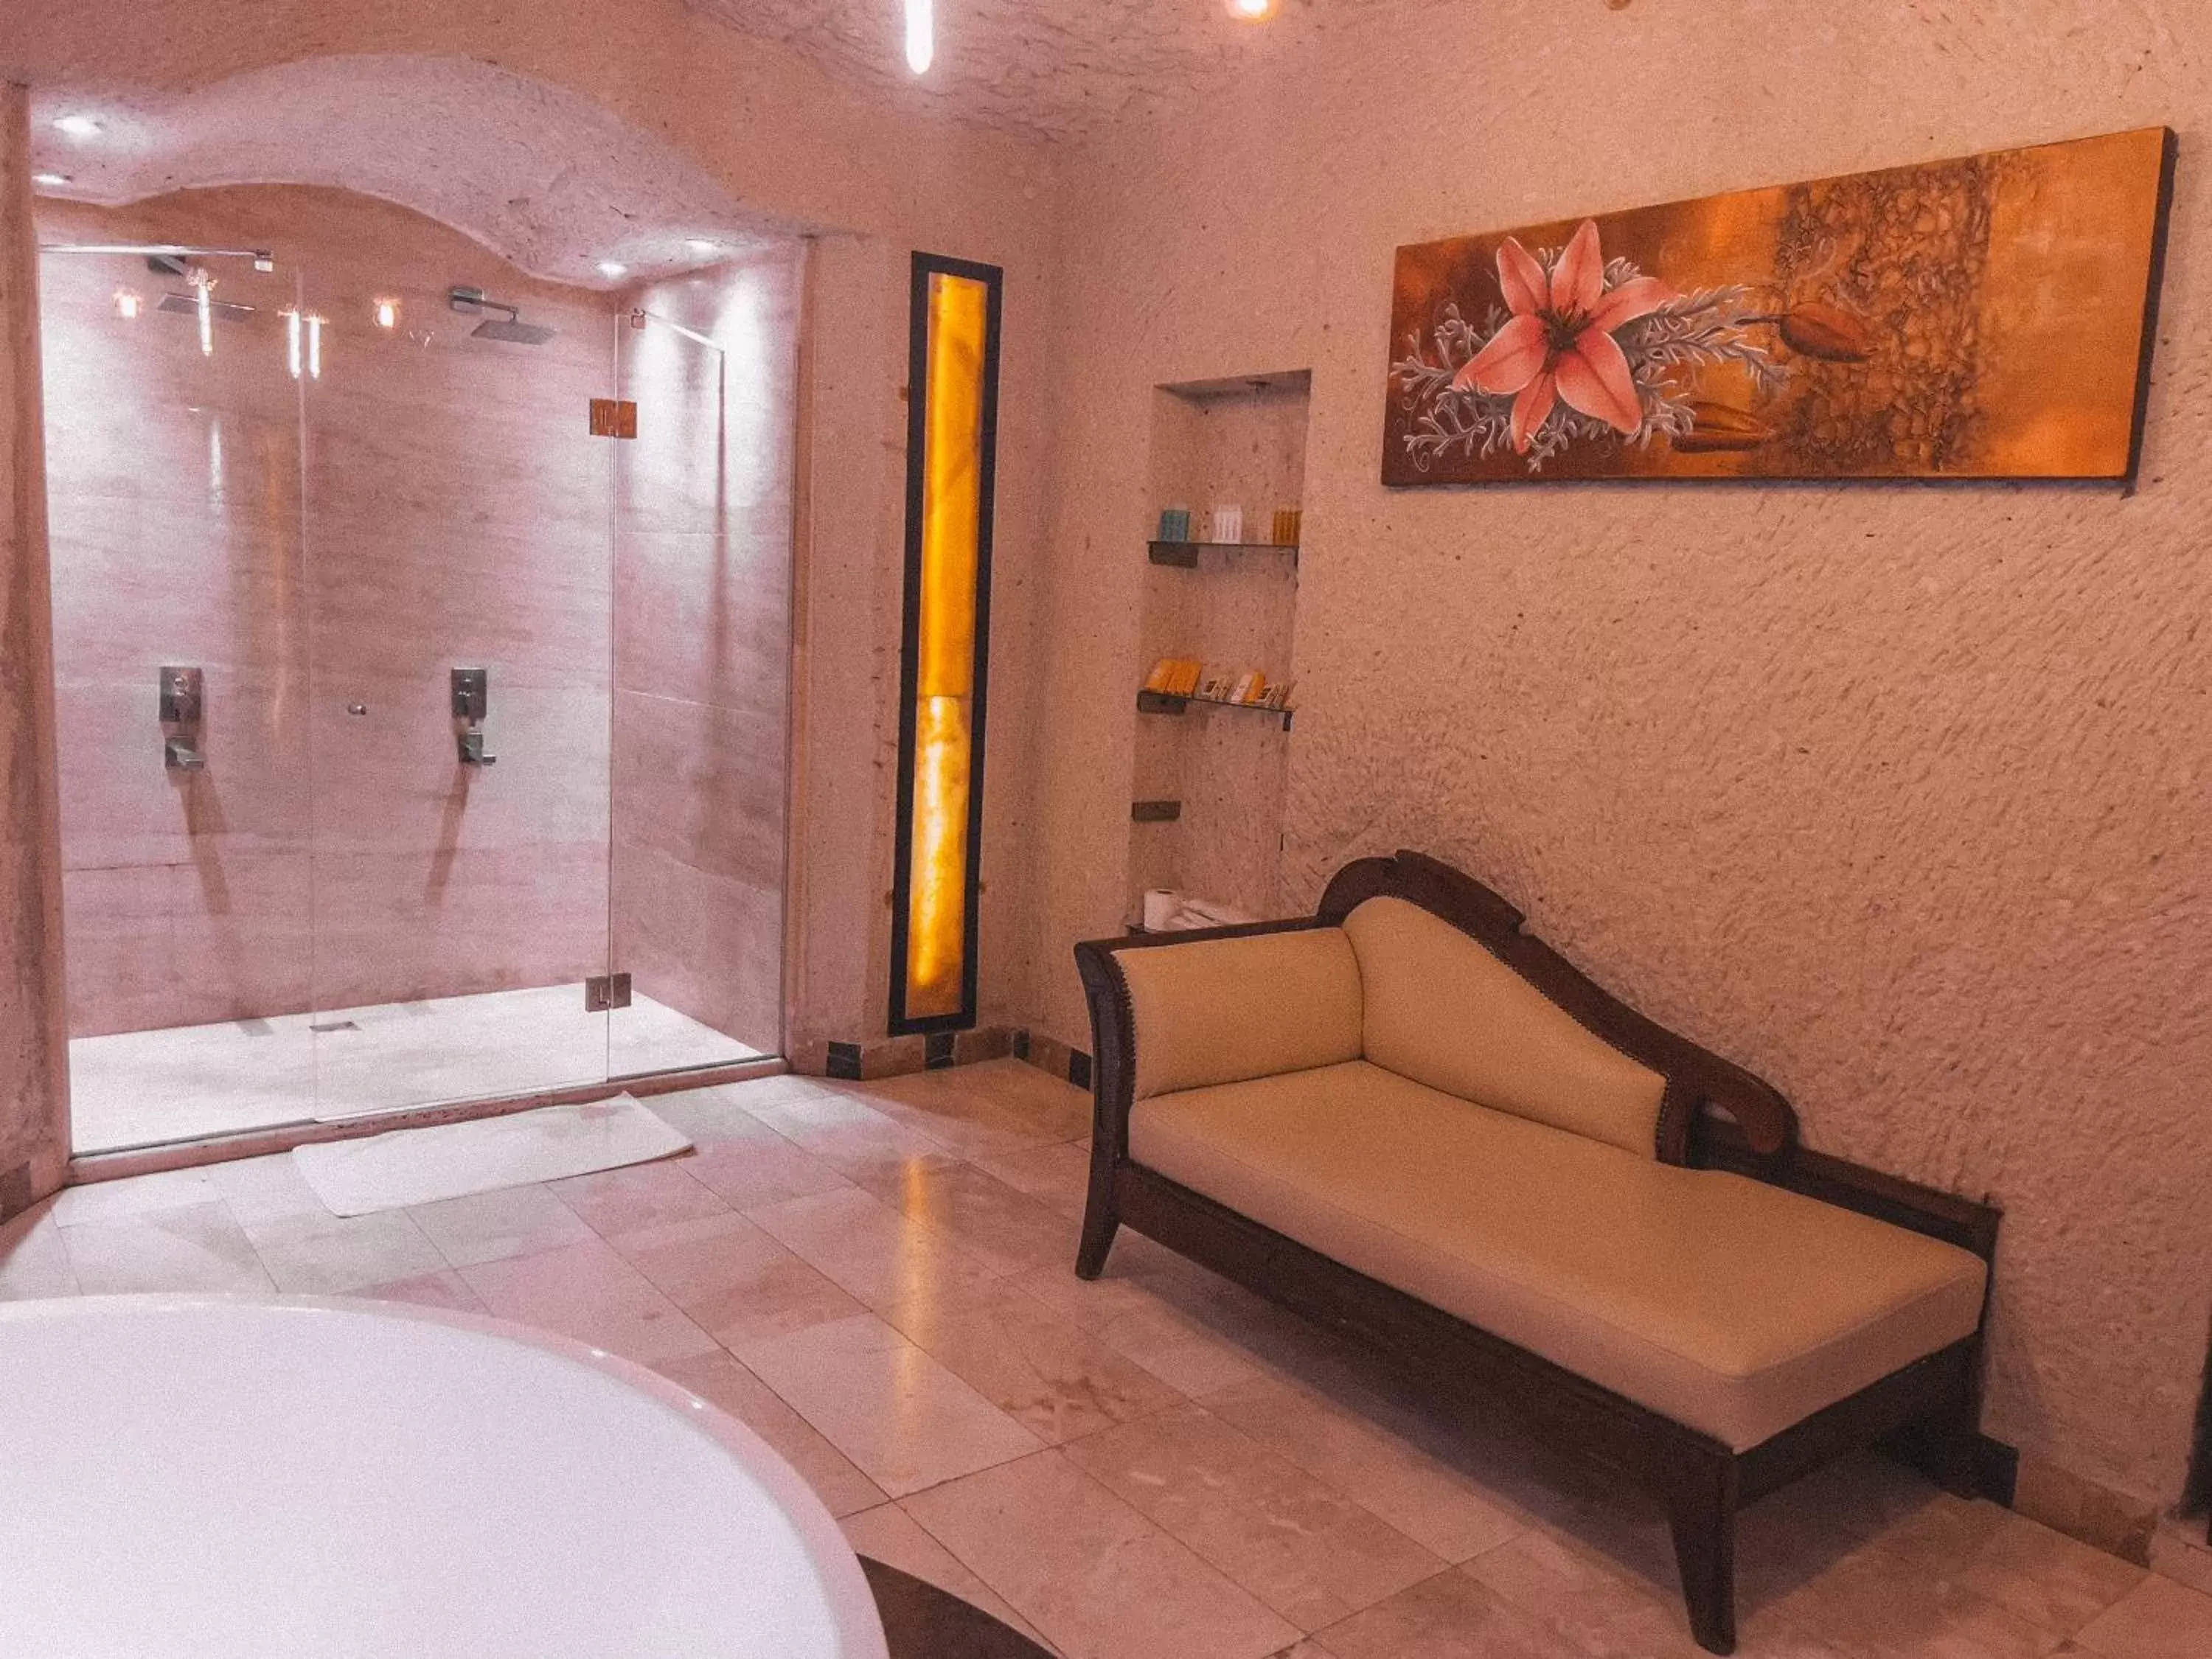 Bathroom, Seating Area in Local Cave House Hotel